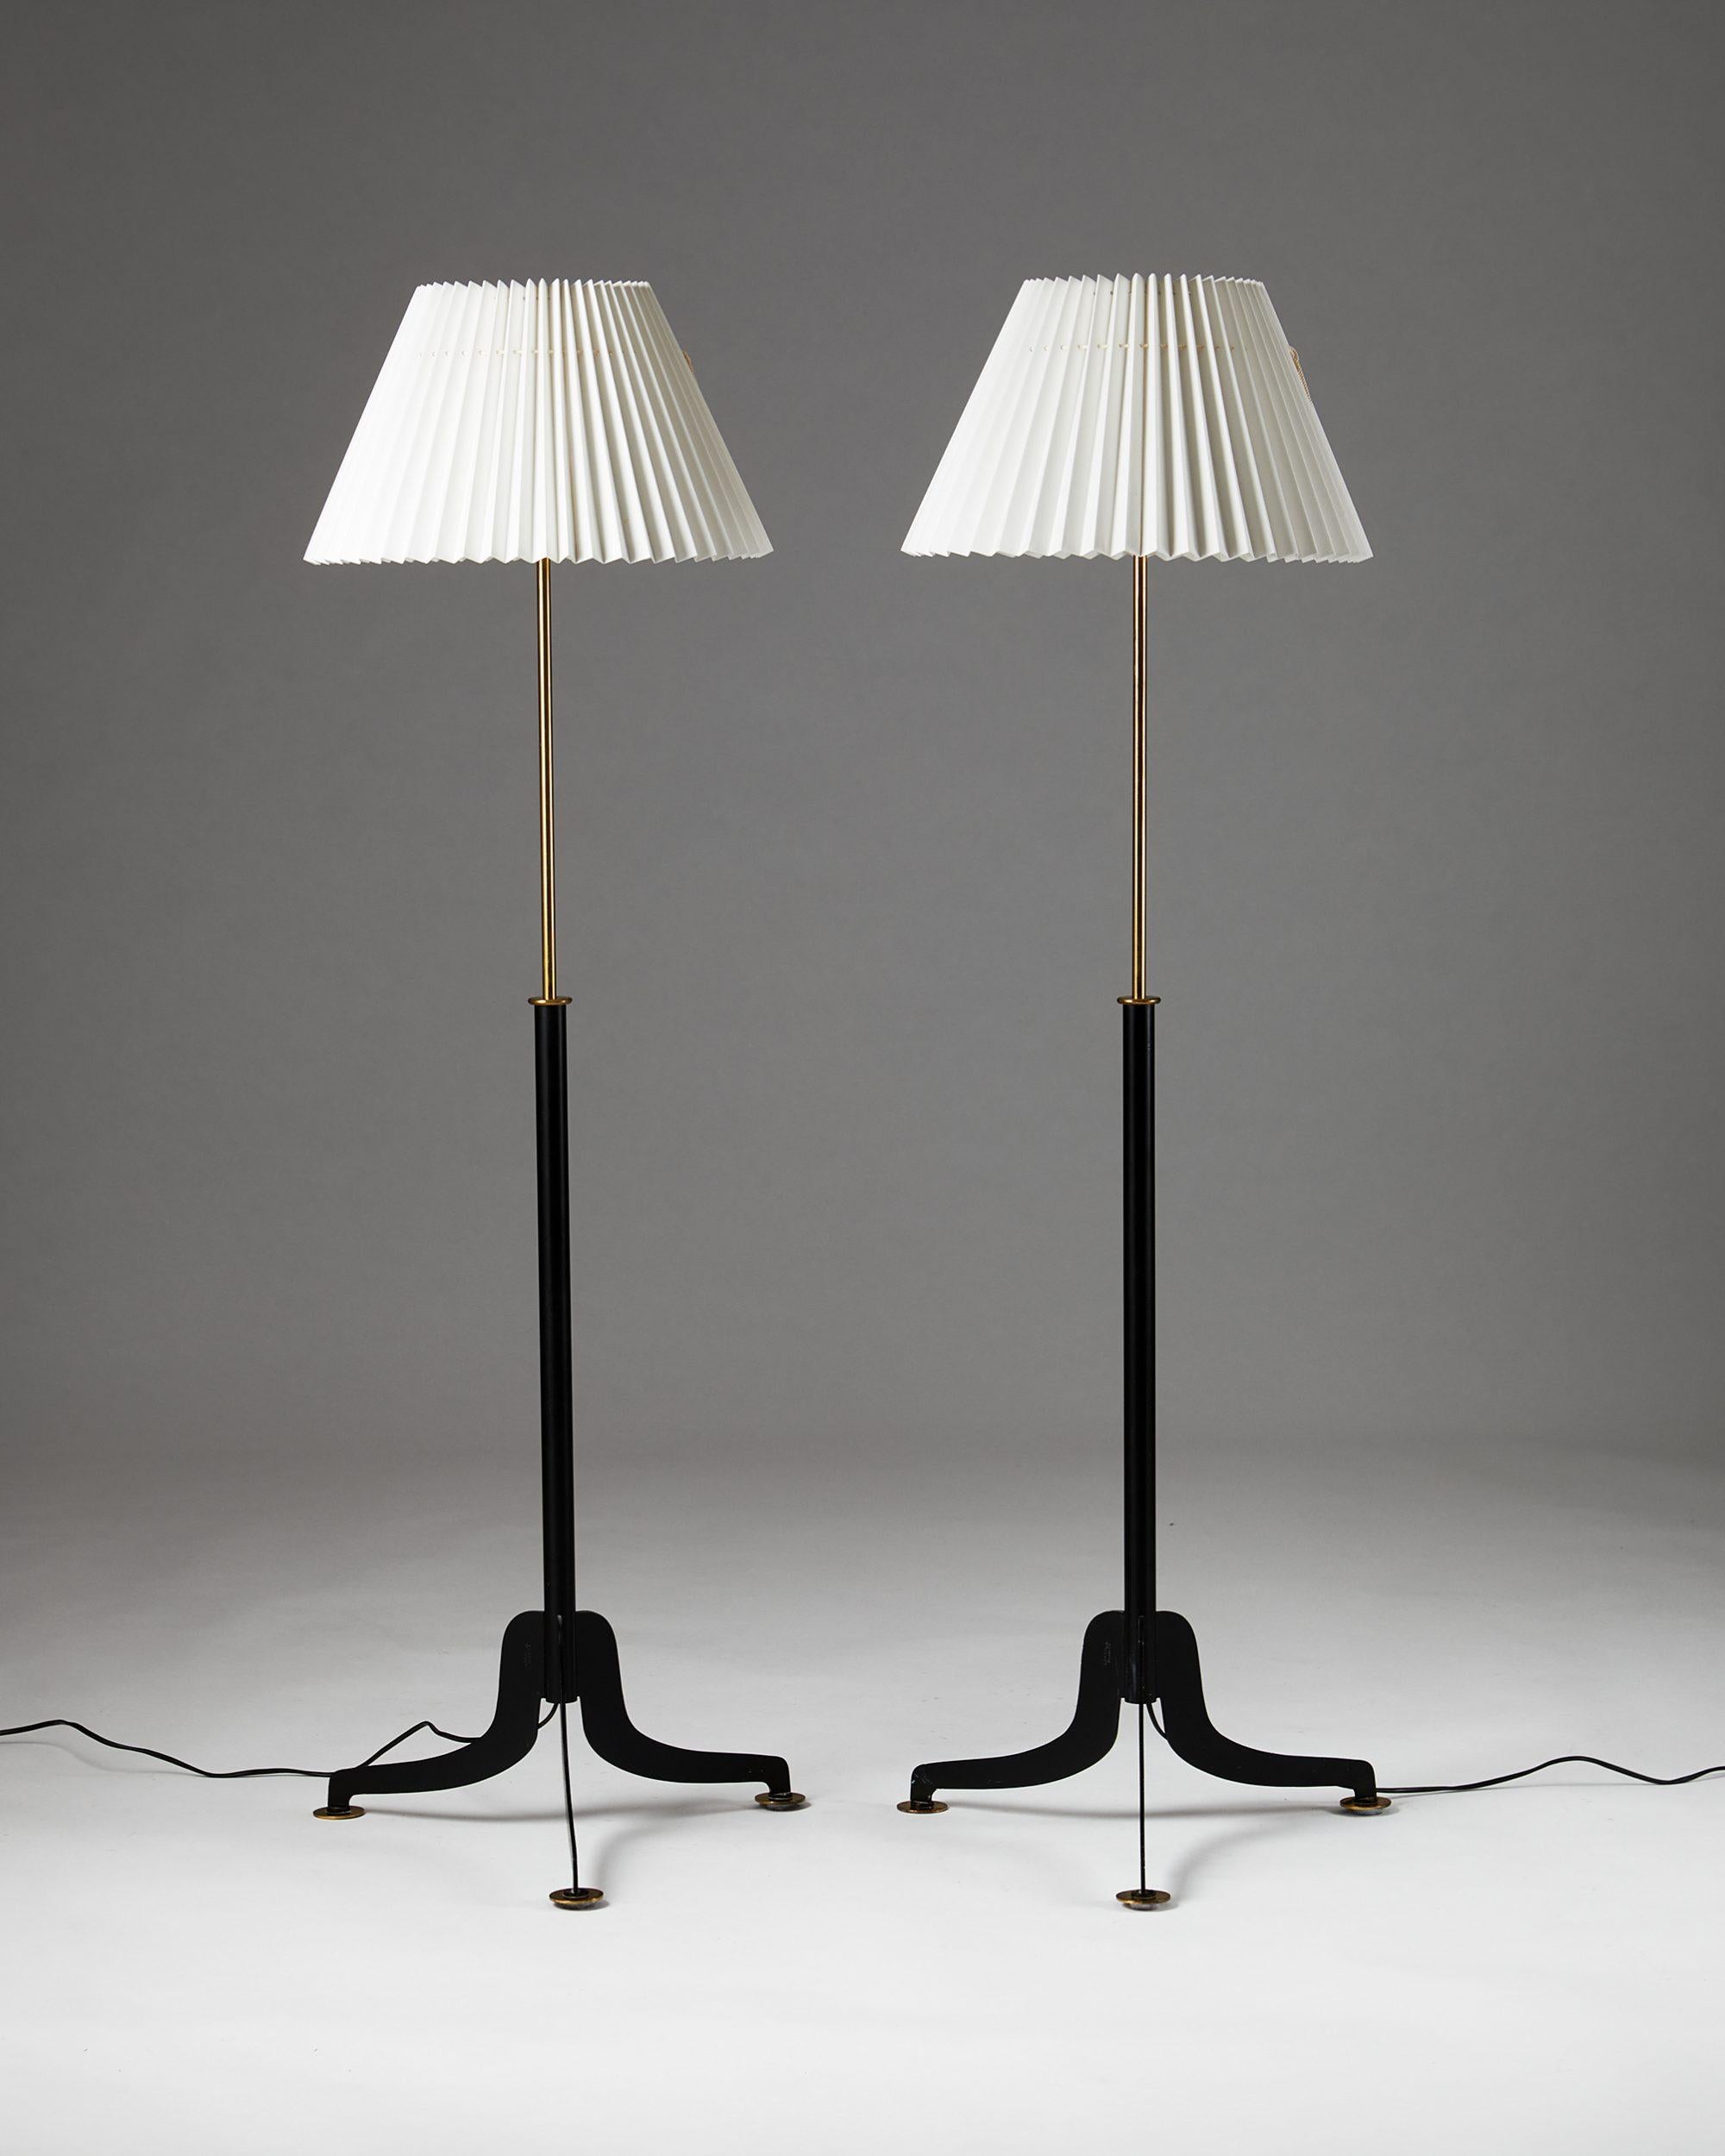 1950's.

Lacquered metal and brass with pleated cotton shade.

Measures: H: 150 cm/ 4' 11